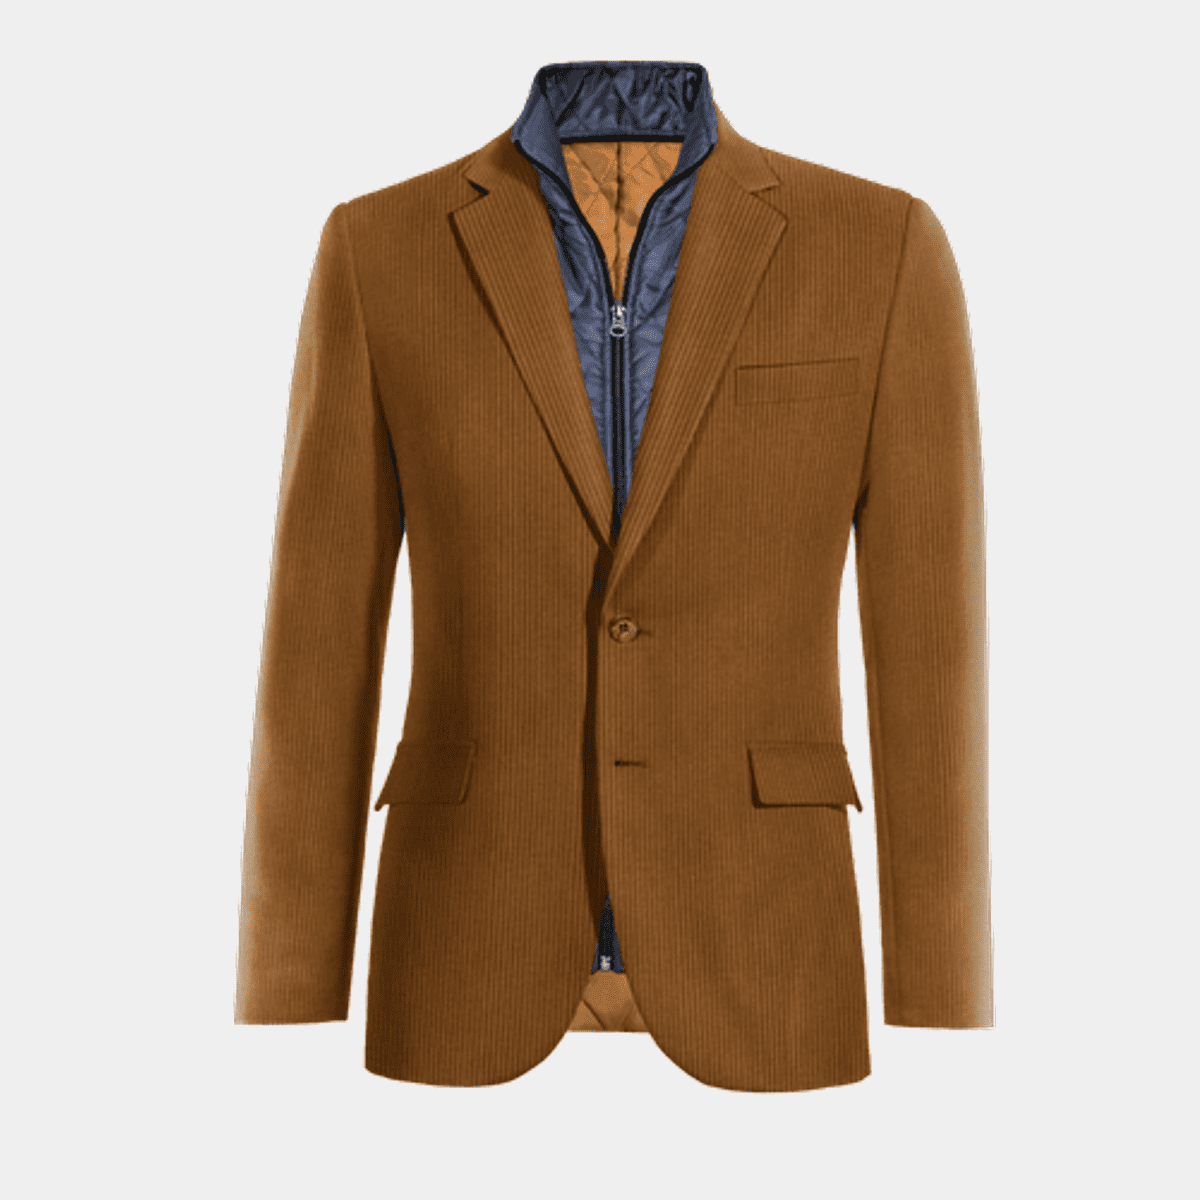 Brown Corduroy Suit Jacket with removable padded piece